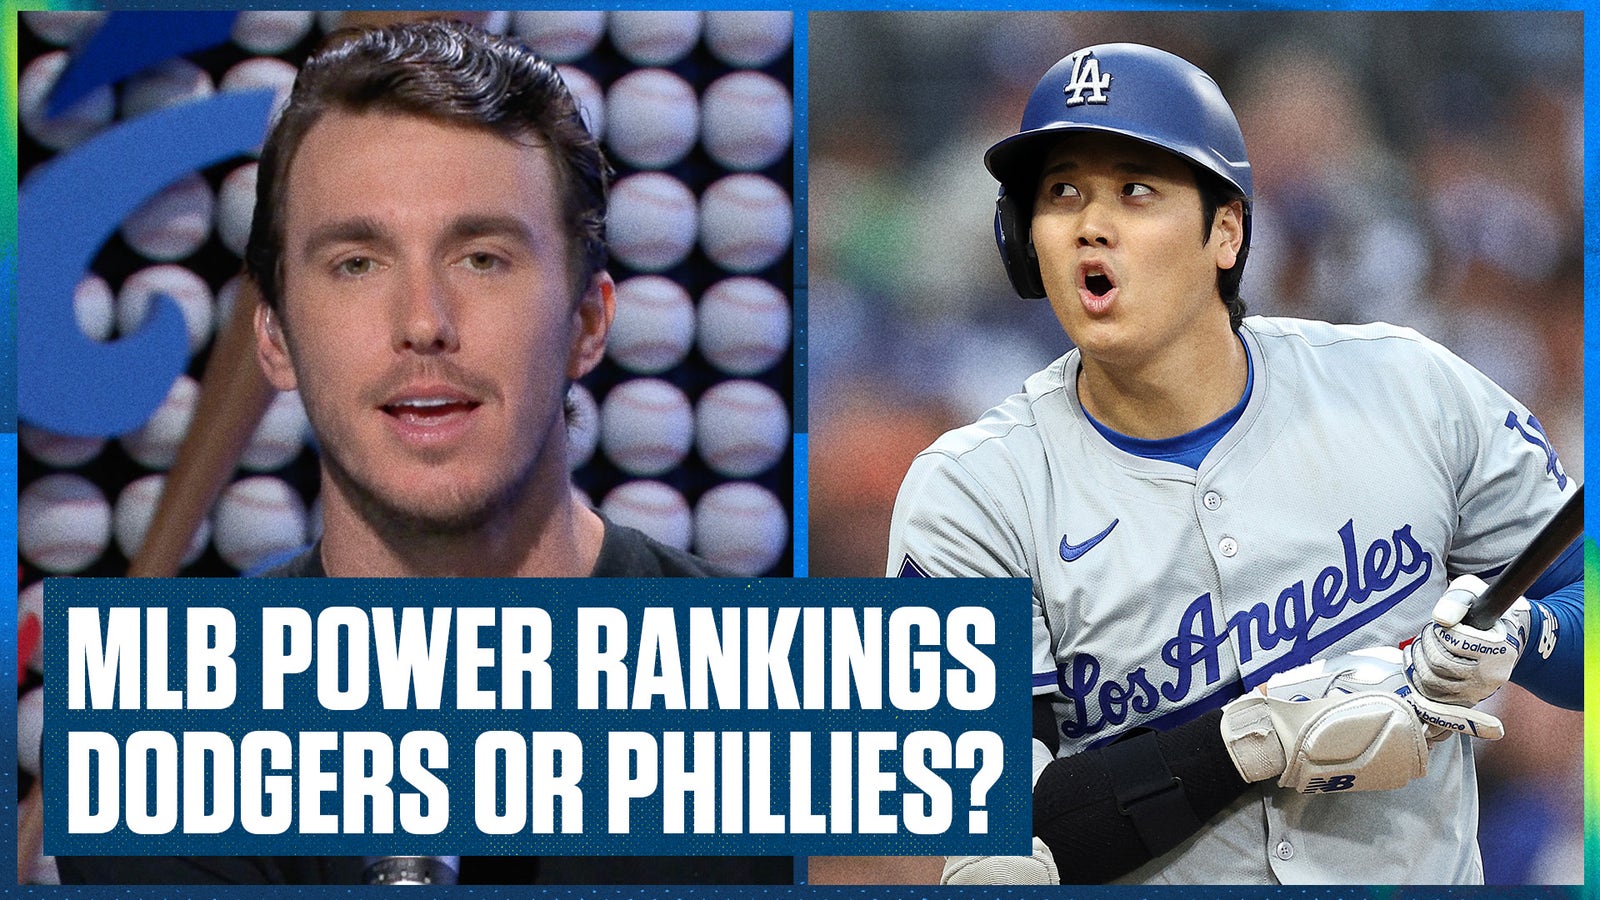 MLB Power Rankings: Dodgers or Phillies for No. 1 spot